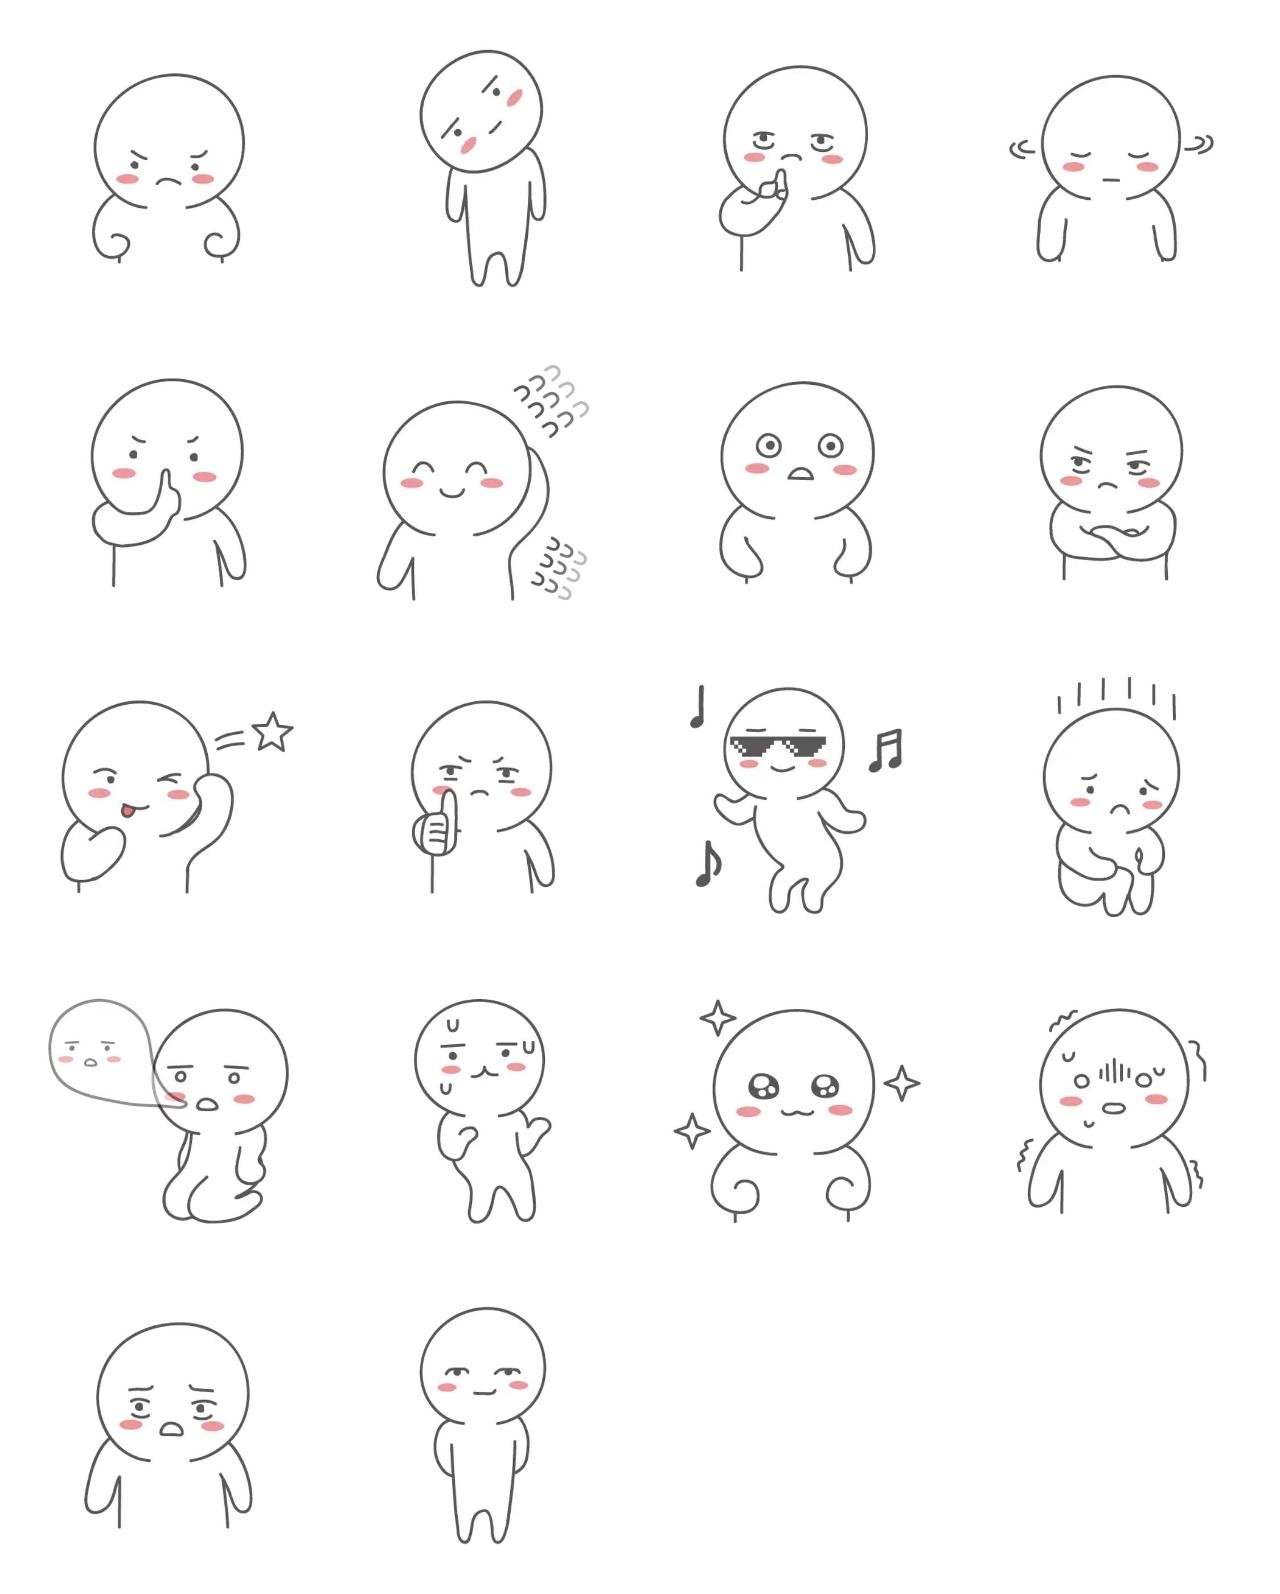 Sosso sticker People,Etc. sticker pack for Whatsapp, Telegram, Signal, and others chatting and message apps